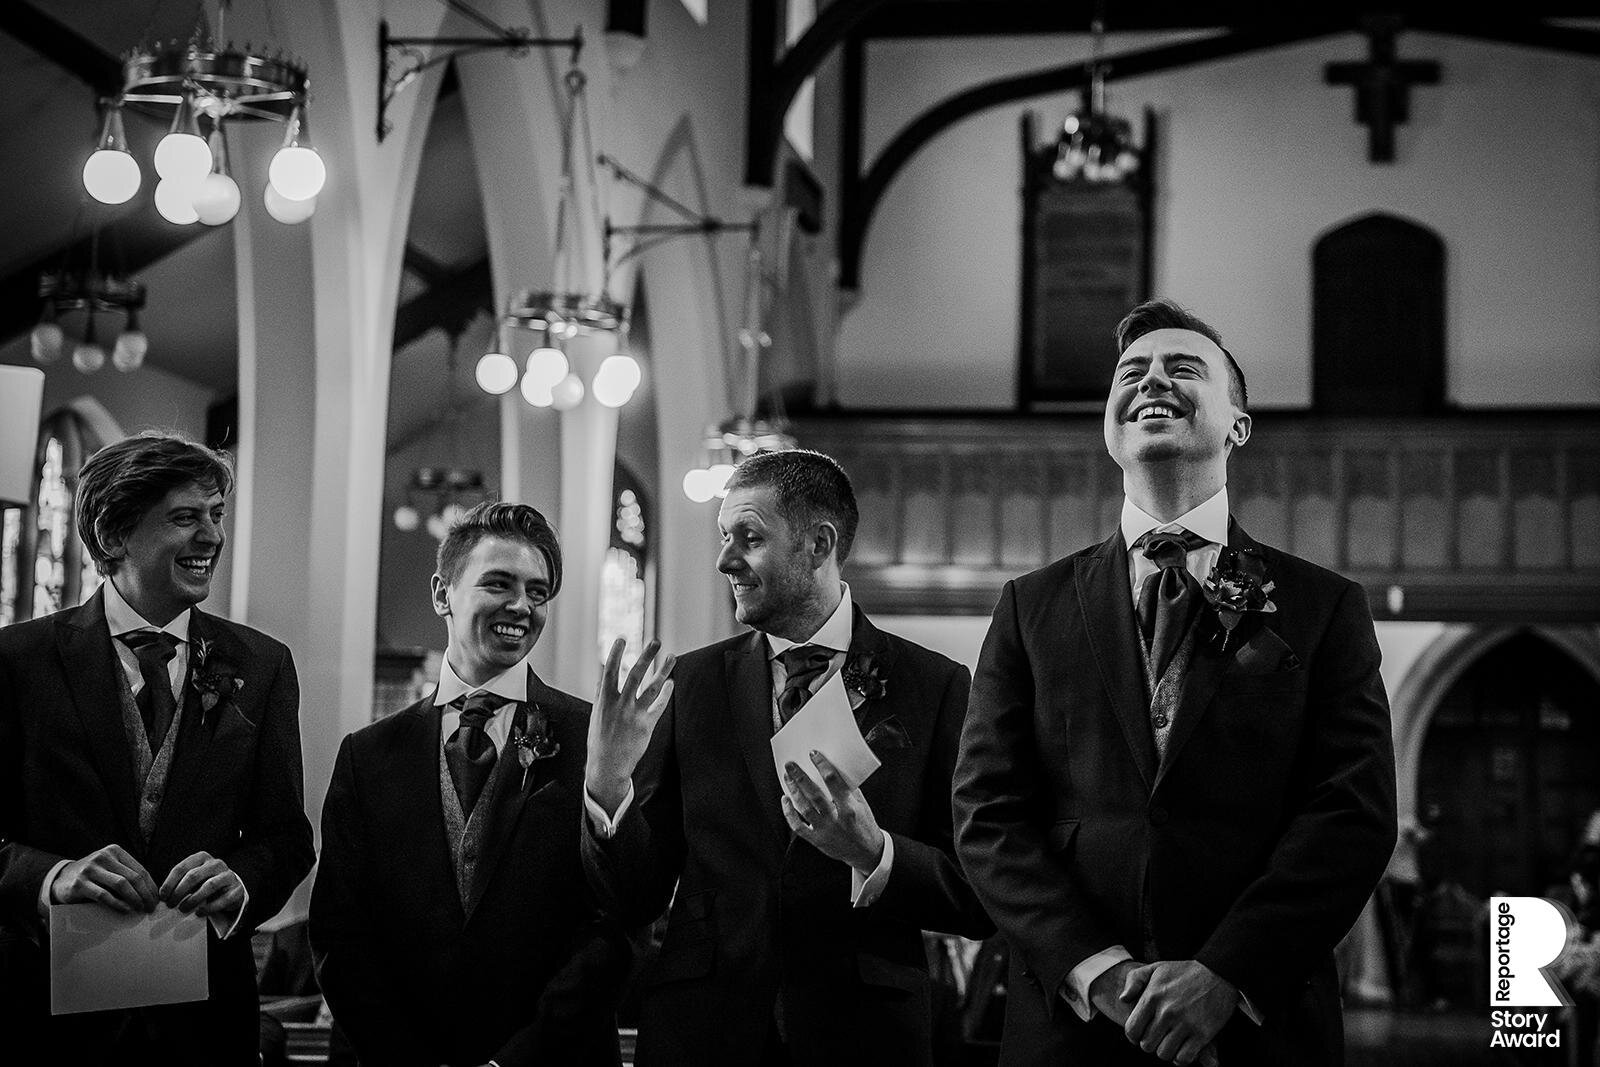  Groom waits at alter while his friends joke behind him 